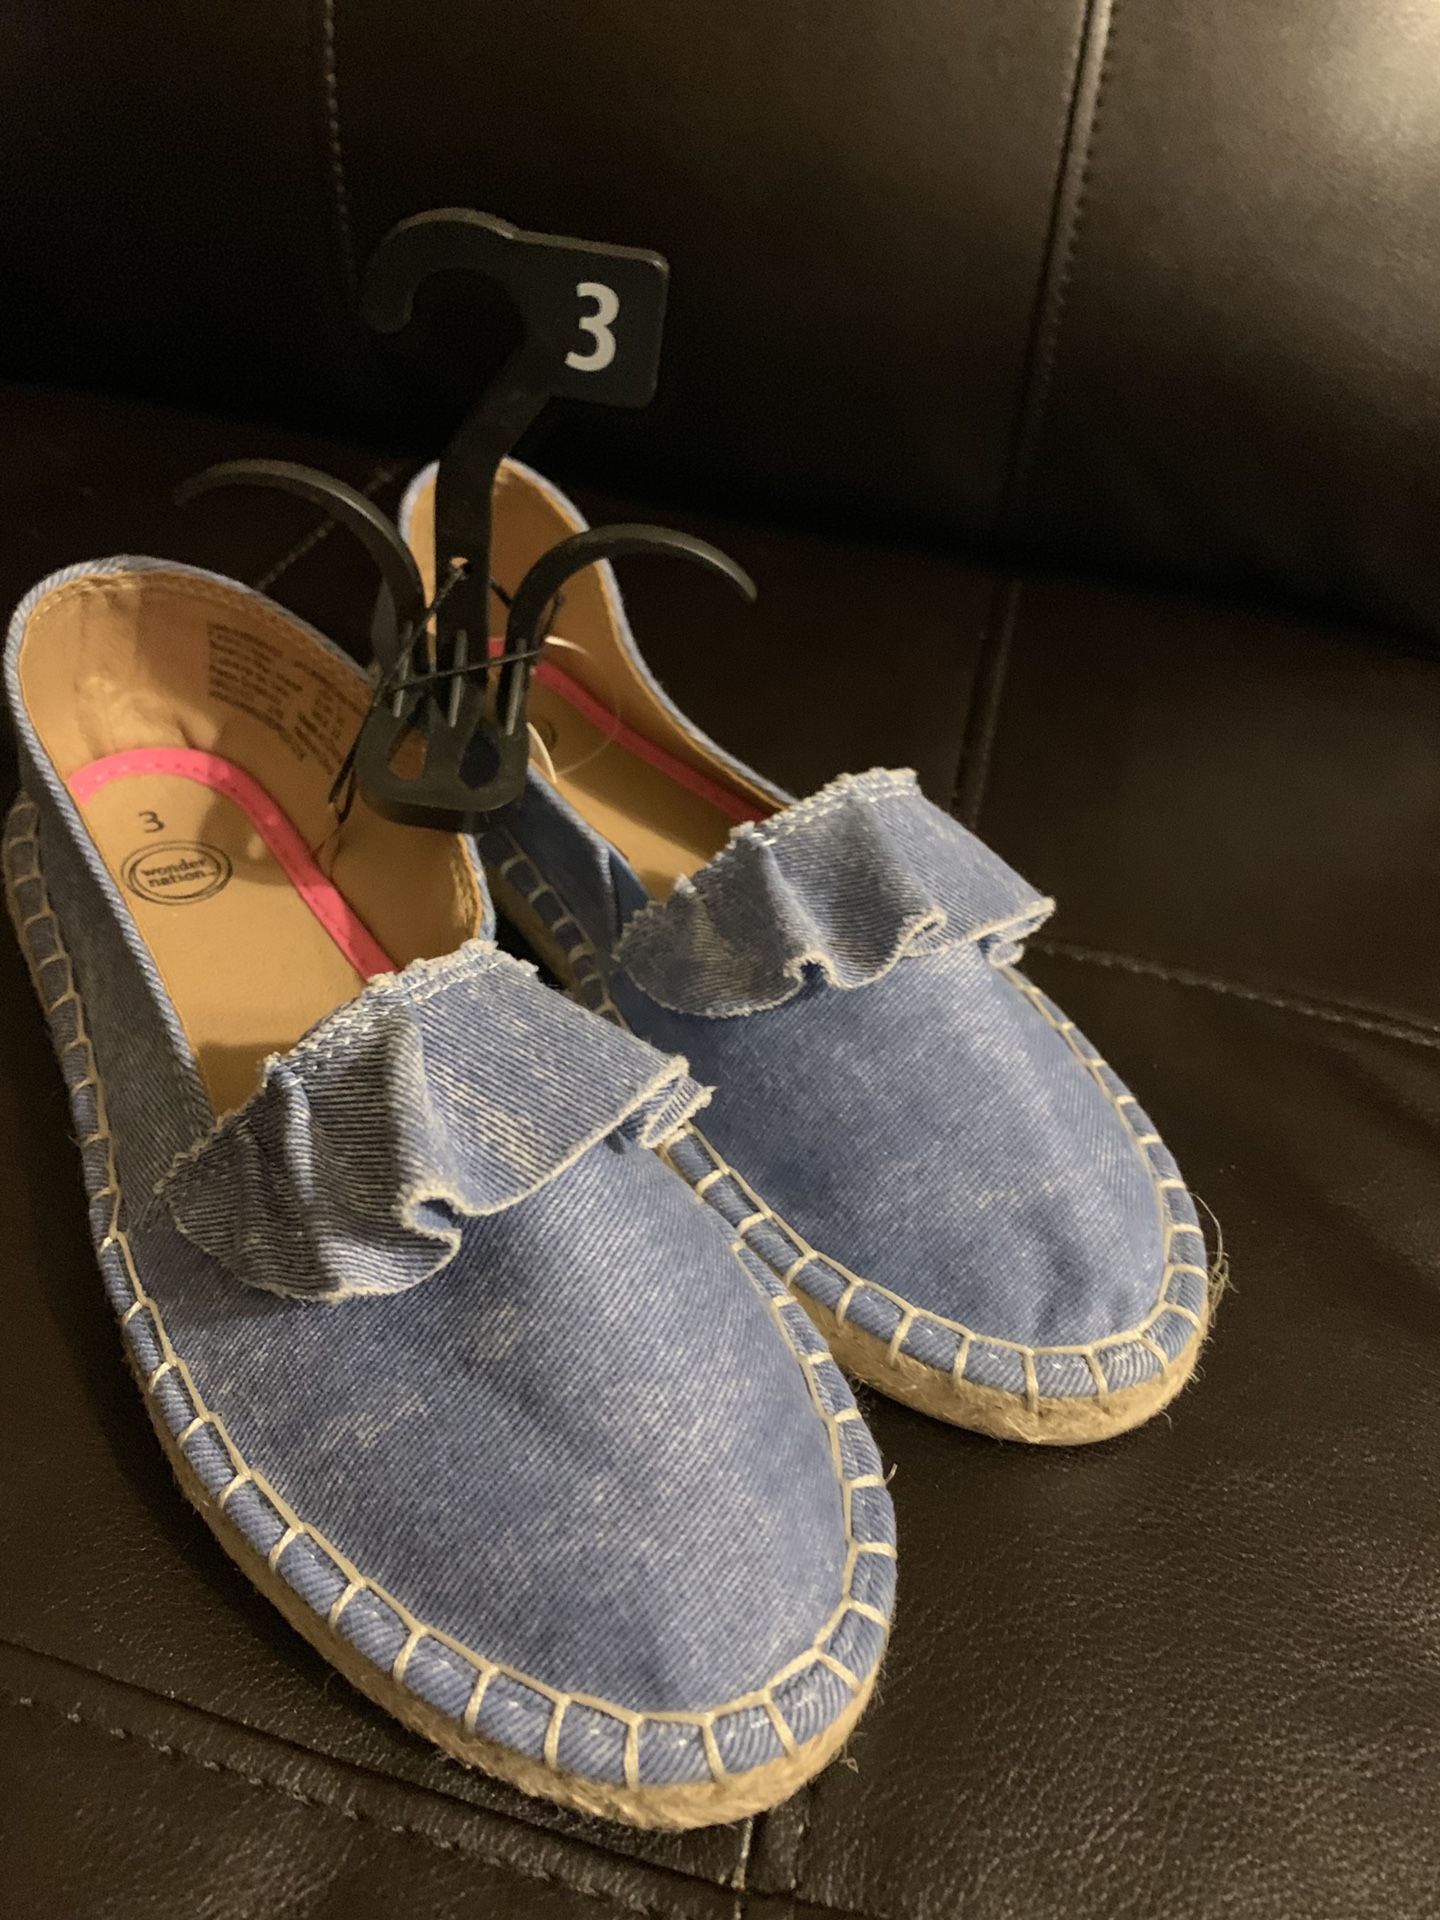 Girls size 3 Shoes, New!